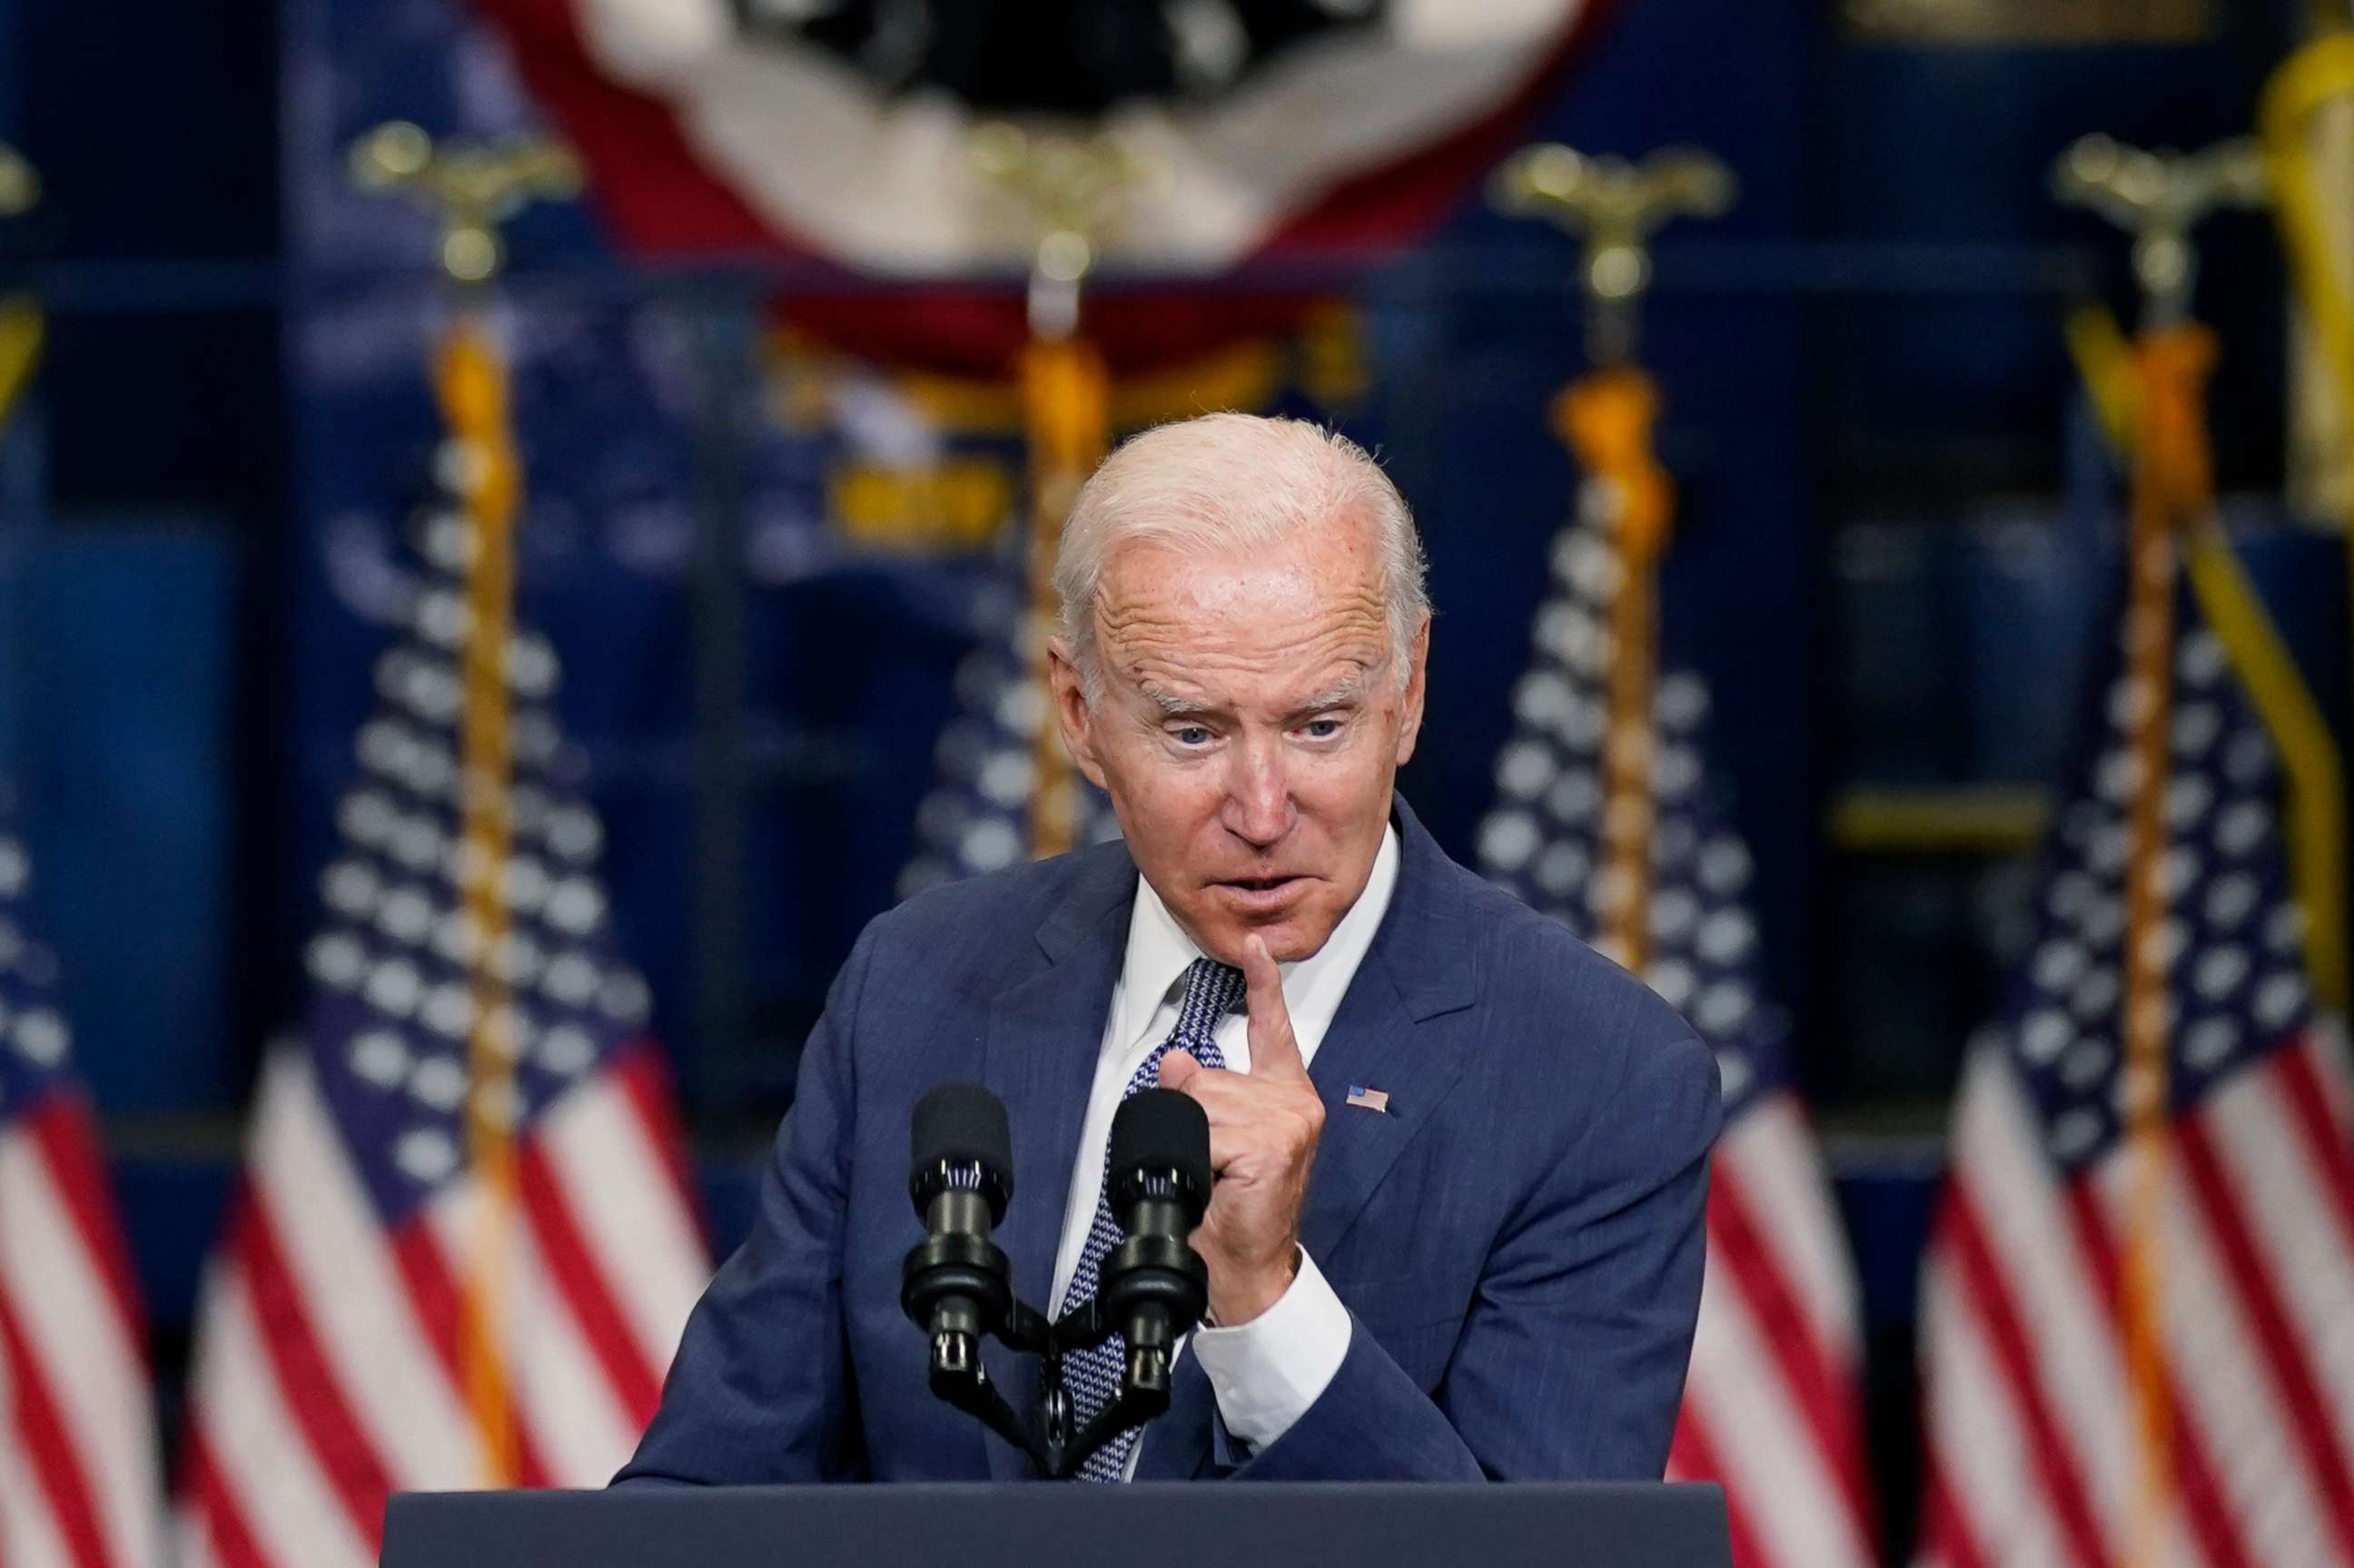 PHOTO: President Joe Biden delivers remarks at NJ Transit Meadowlands Maintenance Complex to promote his "Build Back Better" agenda, Oct. 25, 2021, in Kearny, N.J.